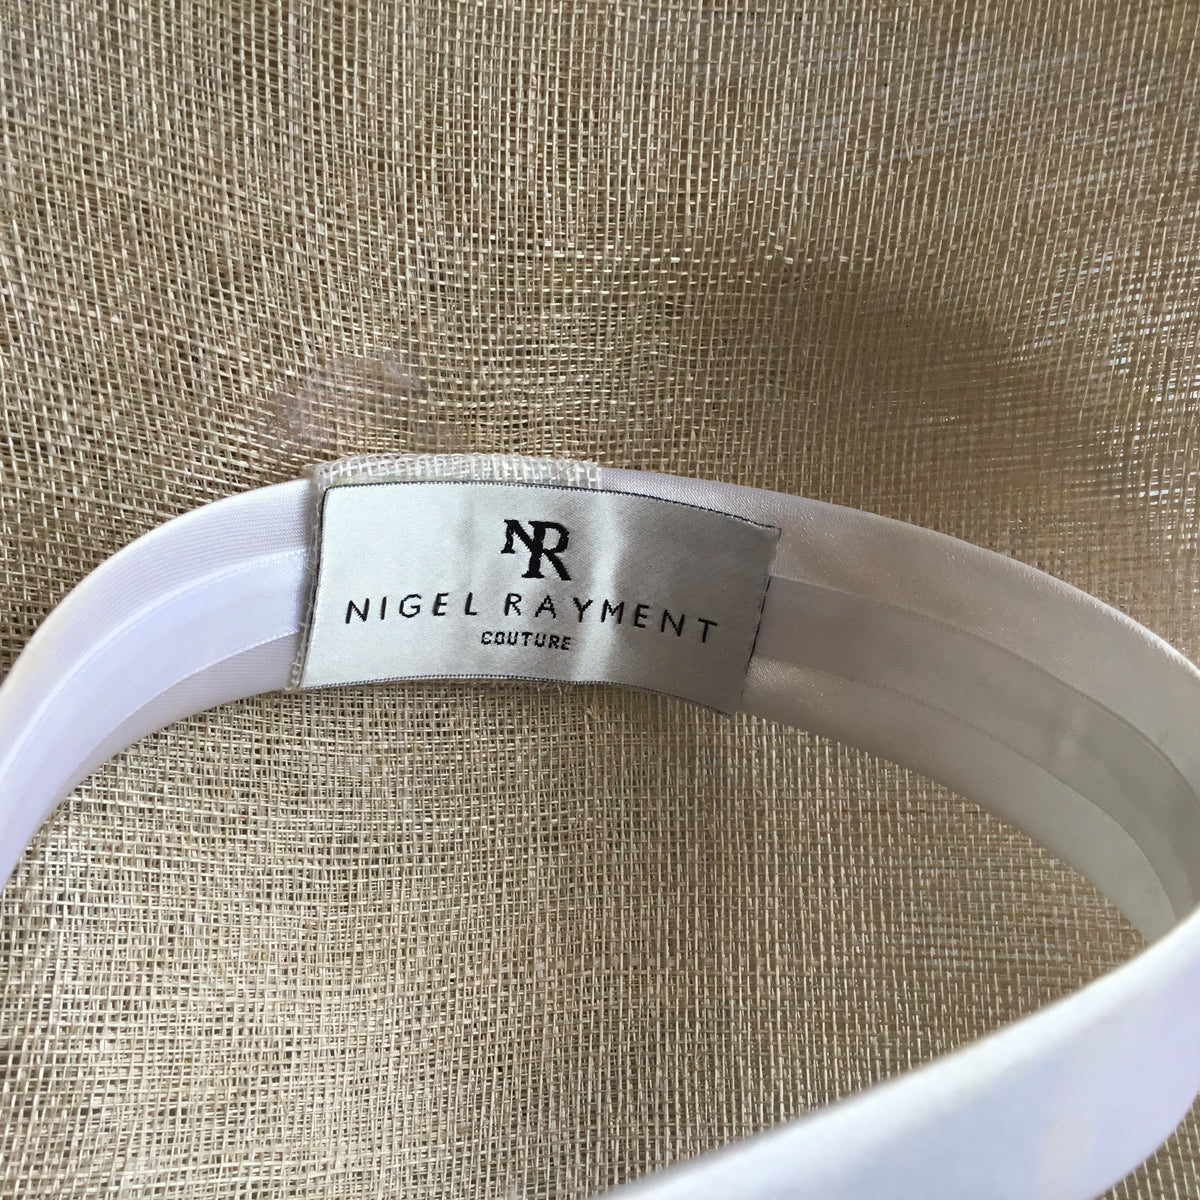 Nigel Rayment disc with feather flower and bow detail hatinator Coffee One size